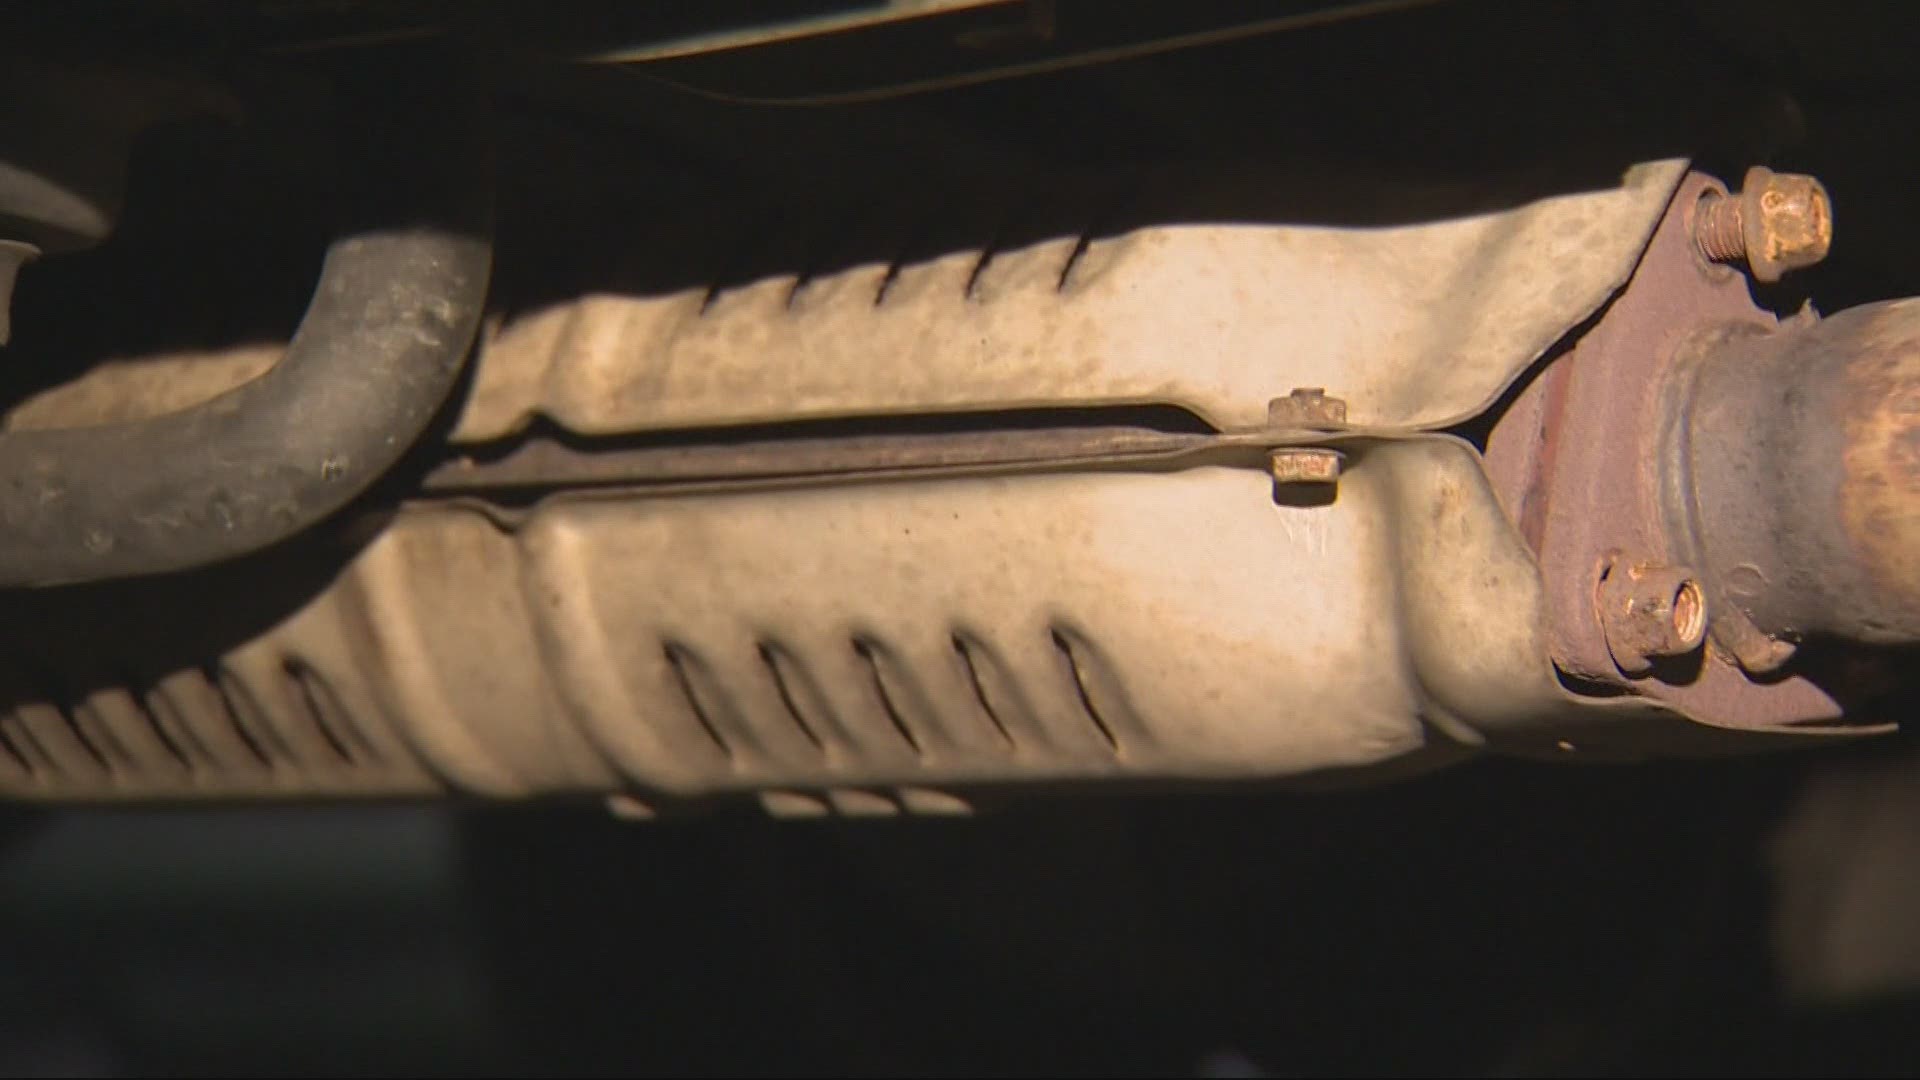 Oregon bill aims to stop catalytic converter theft 